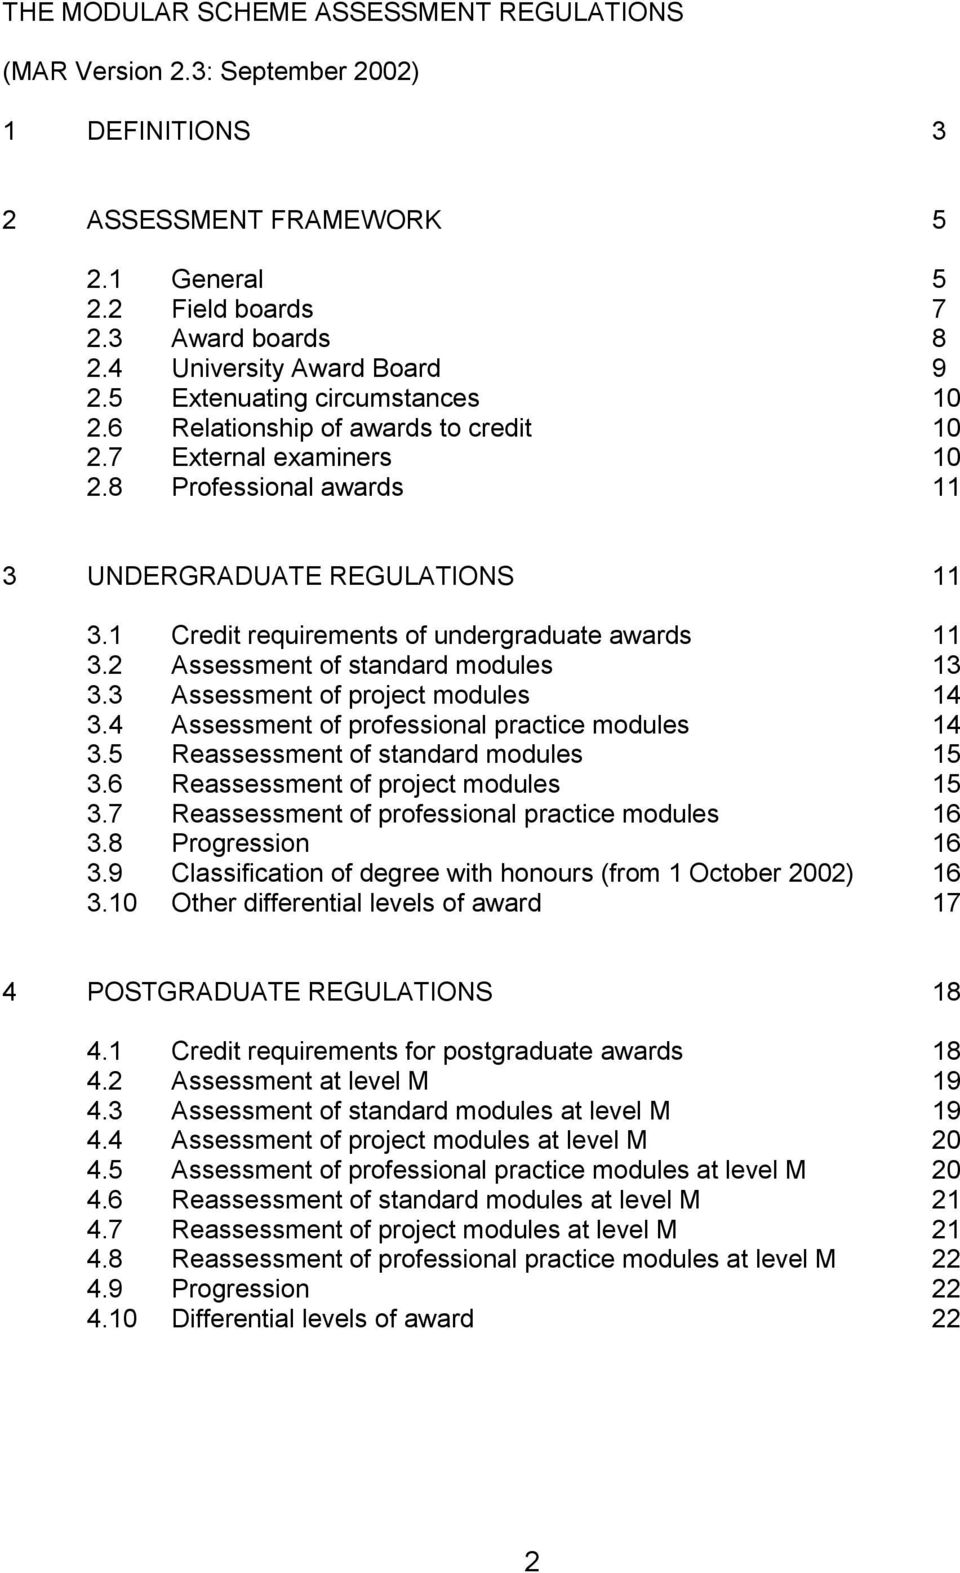 1 Credit requirements of undergraduate awards 11 3.2 Assessment of standard modules 13 3.3 Assessment of project modules 14 3.4 Assessment of professional practice modules 14 3.